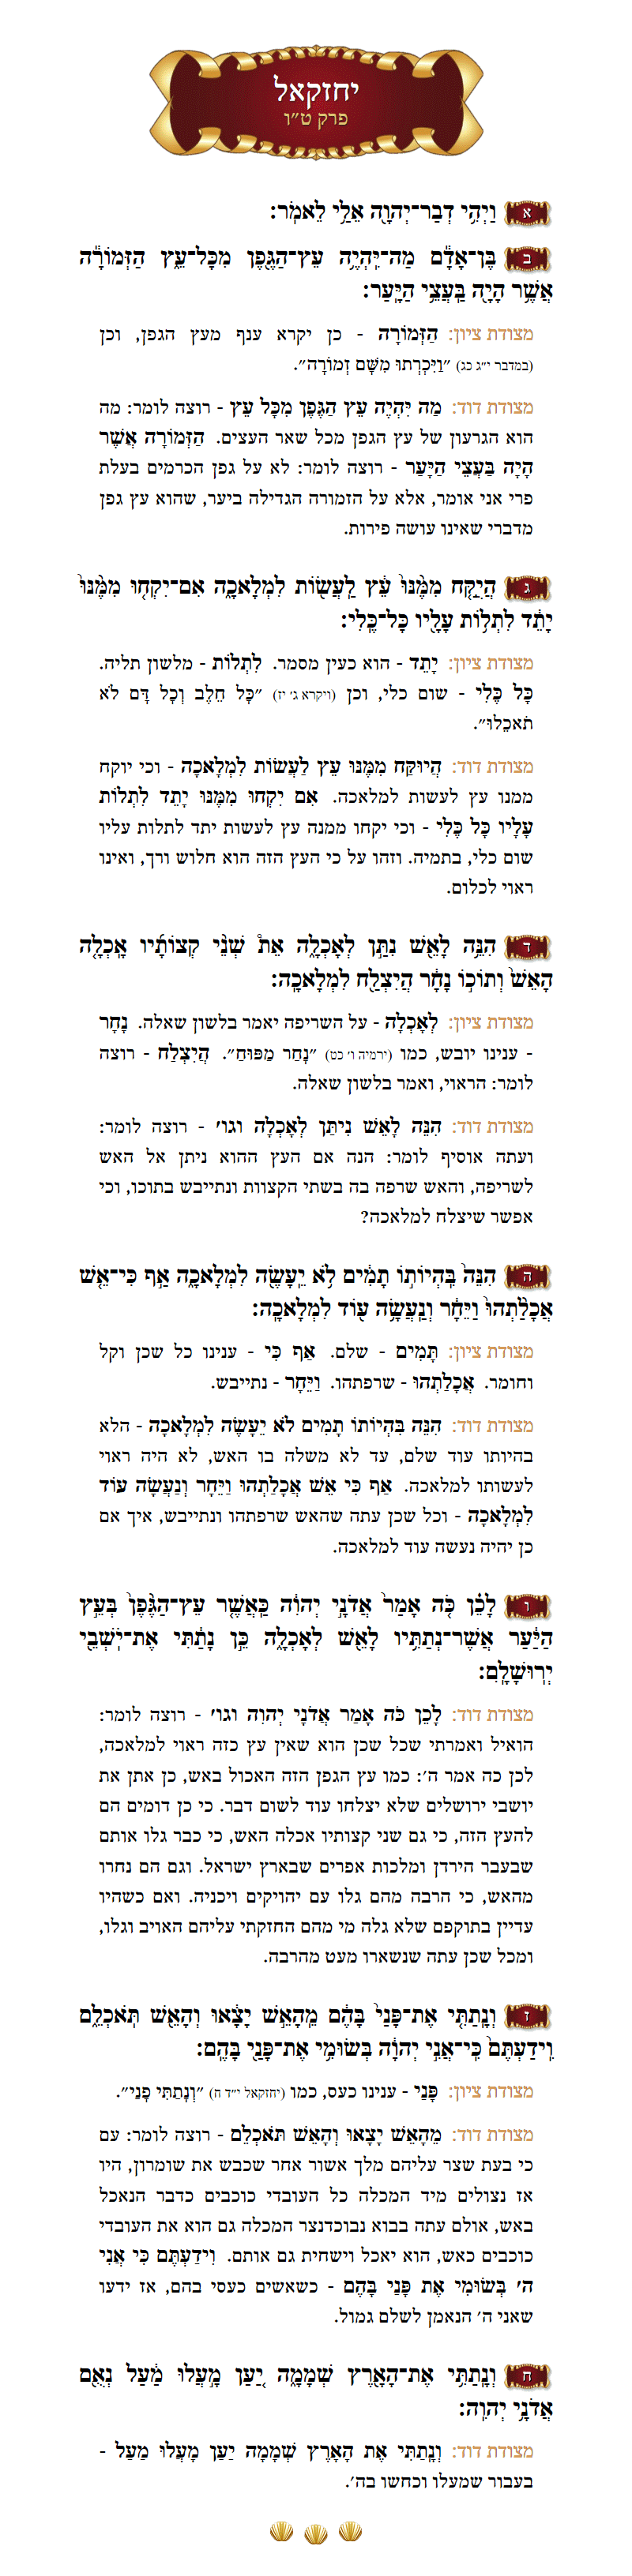 Sefer Yechezkel Chapter 15 with commentary